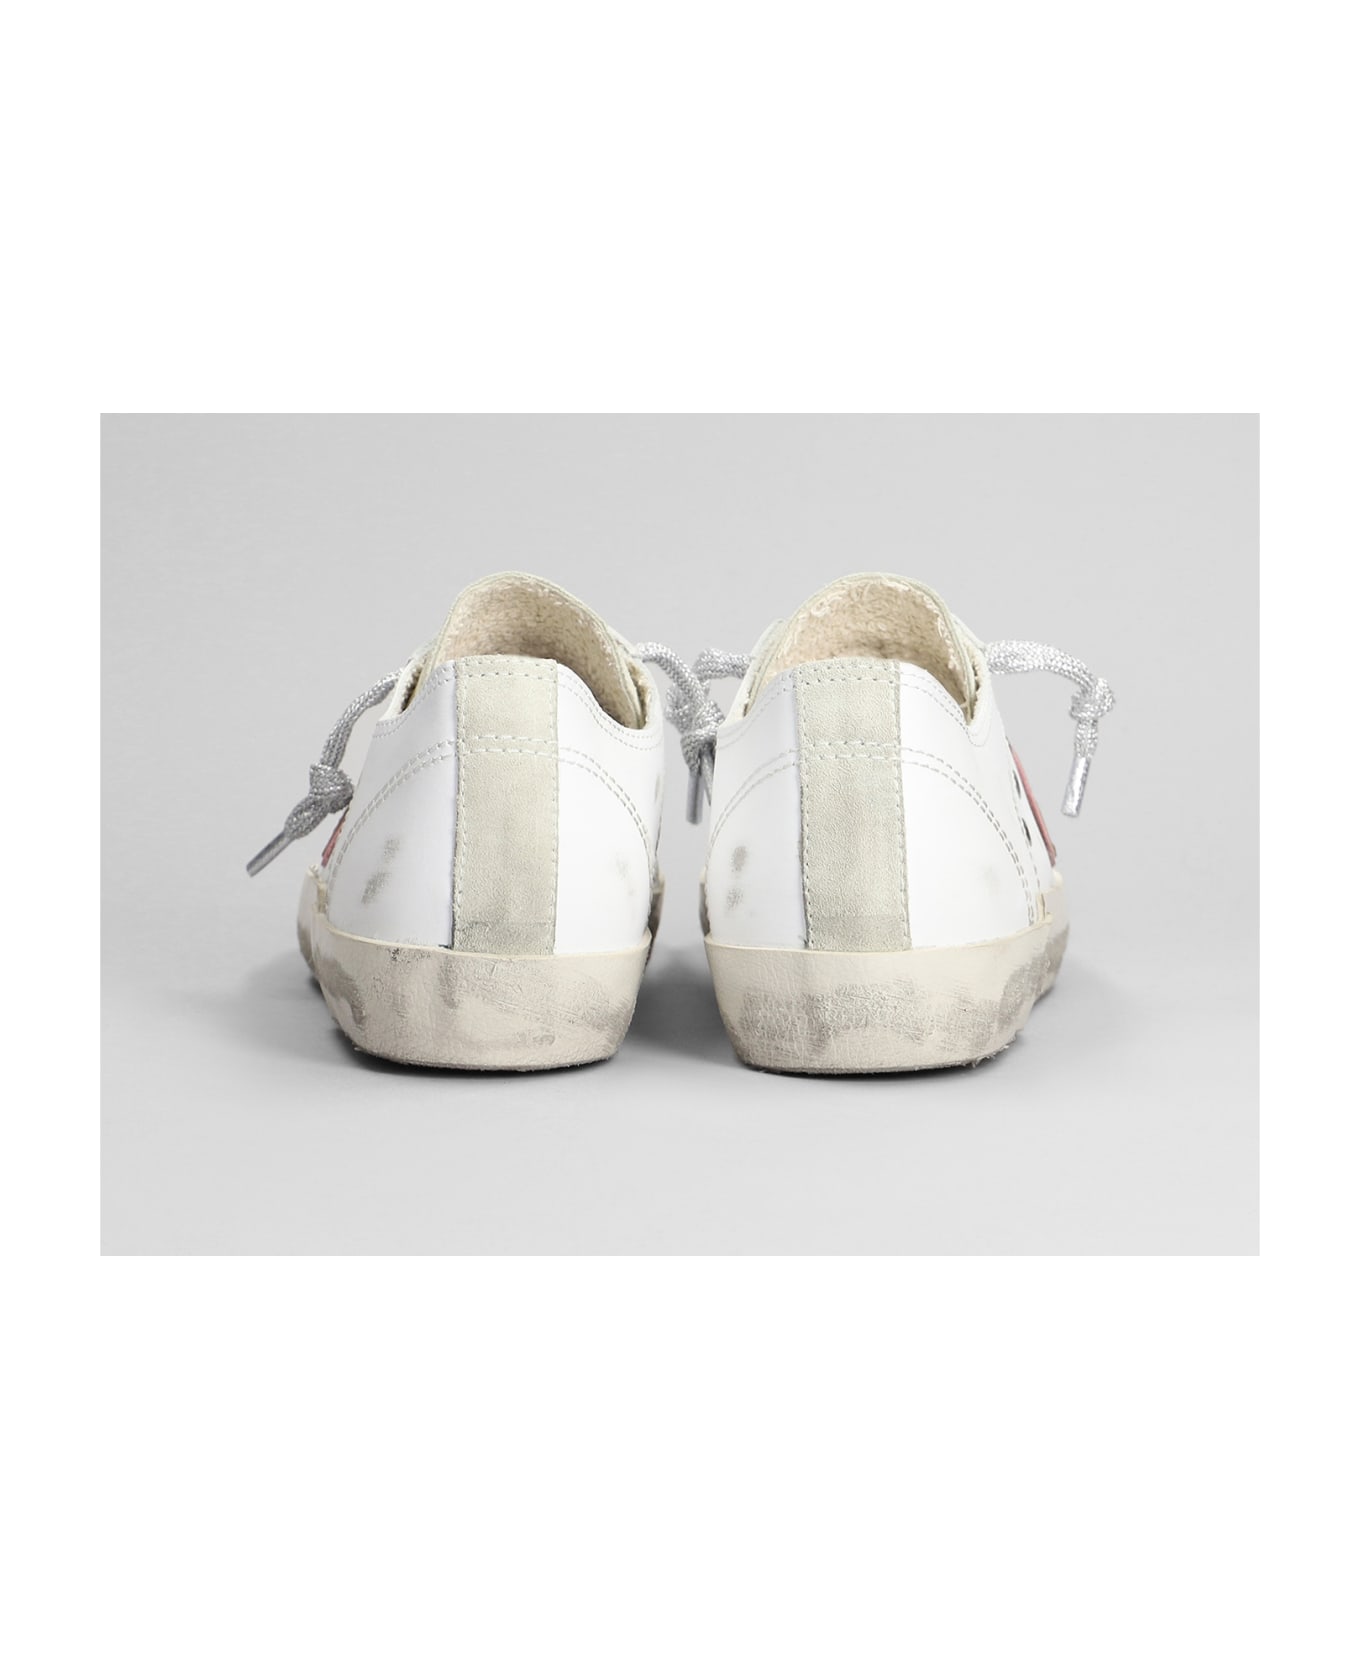 Philippe Model Prsx Low Sneakers In White Suede And Leather - white